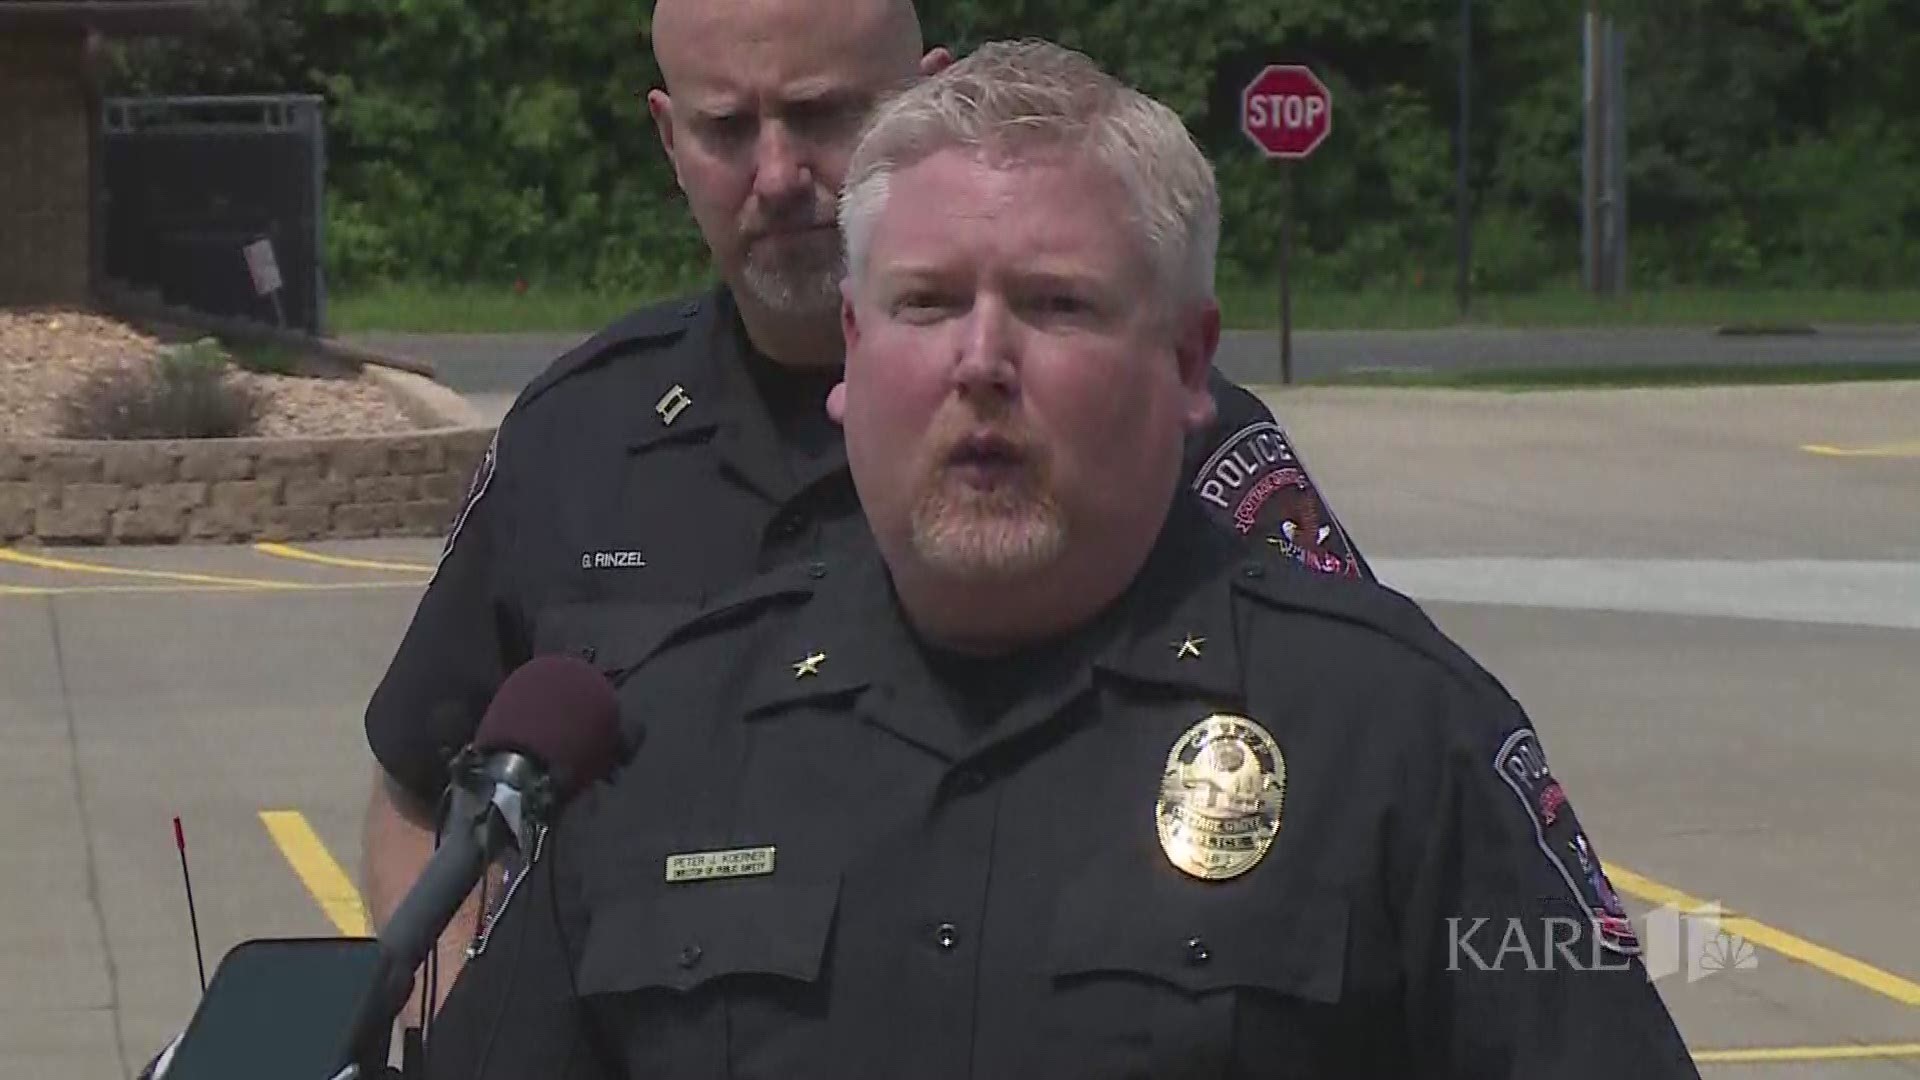 Cottage Grove Police Chief Pete Koerner describes the chase and arrest of a father and the recovery of his two children after an Amber Alert was issued Friday morning. https://kare11.tv/2Mx93dn